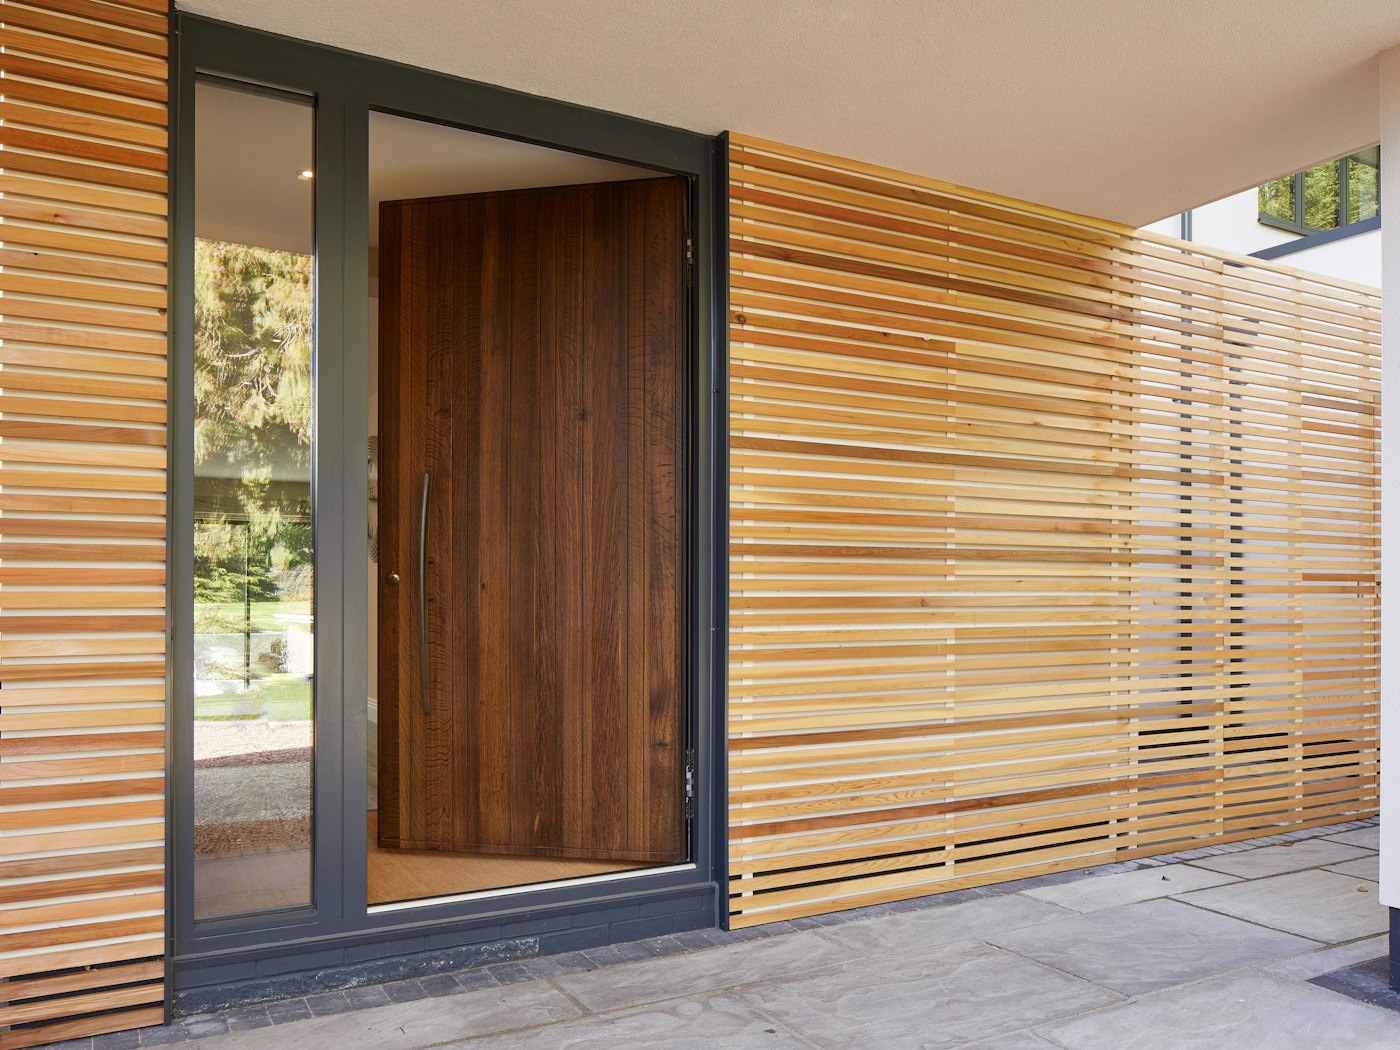 Our Rondo V fumed oak front door has a hinged opening in this house